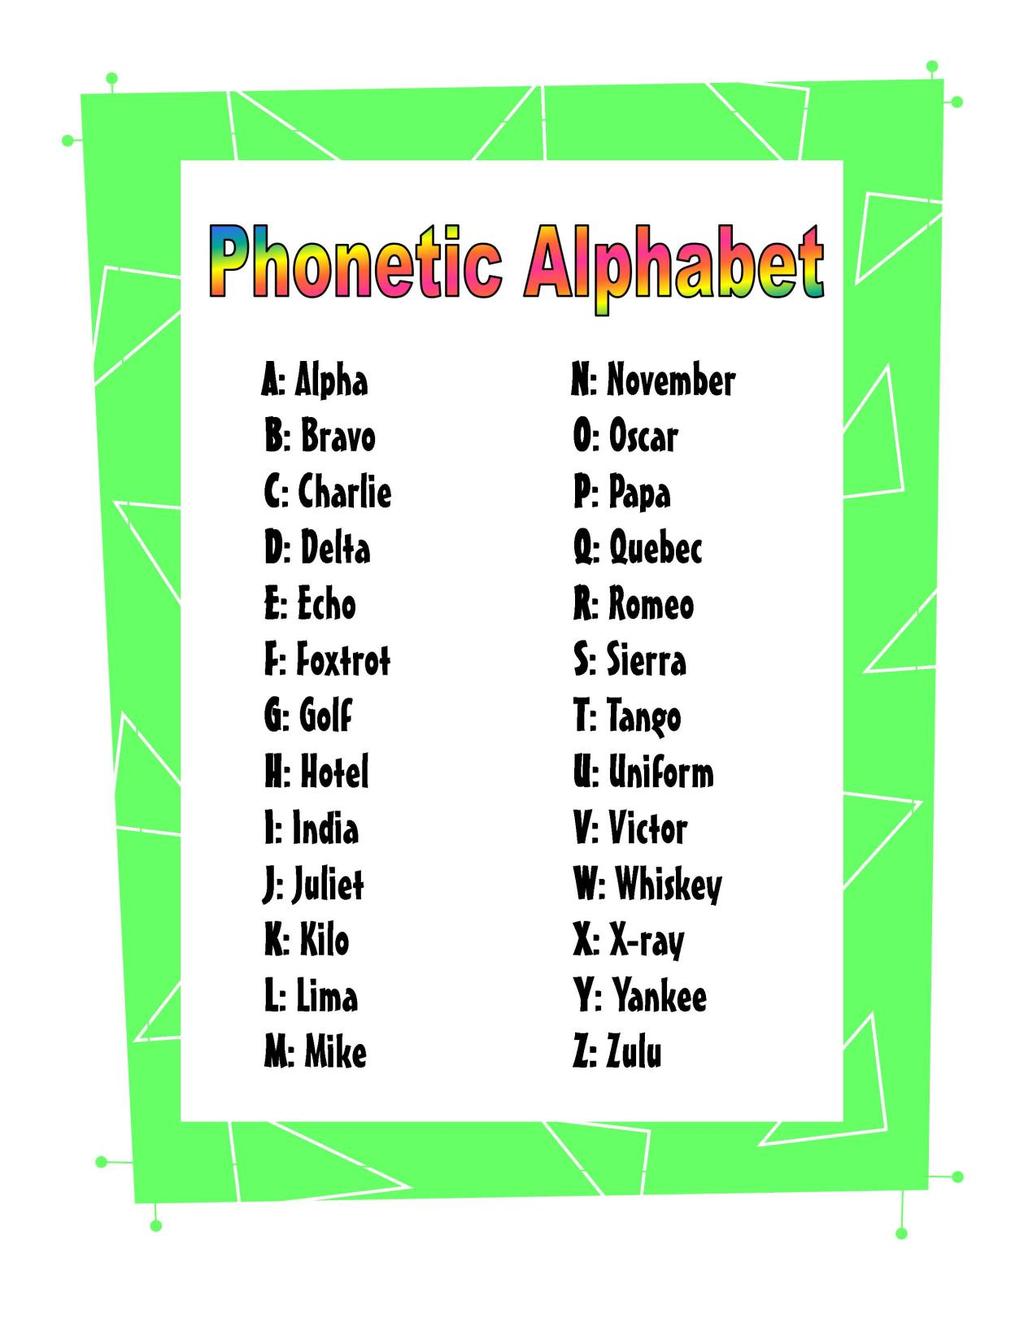 The Phonetic Alphabet Although this is not a code, it is used to make sure that people receiving a message have